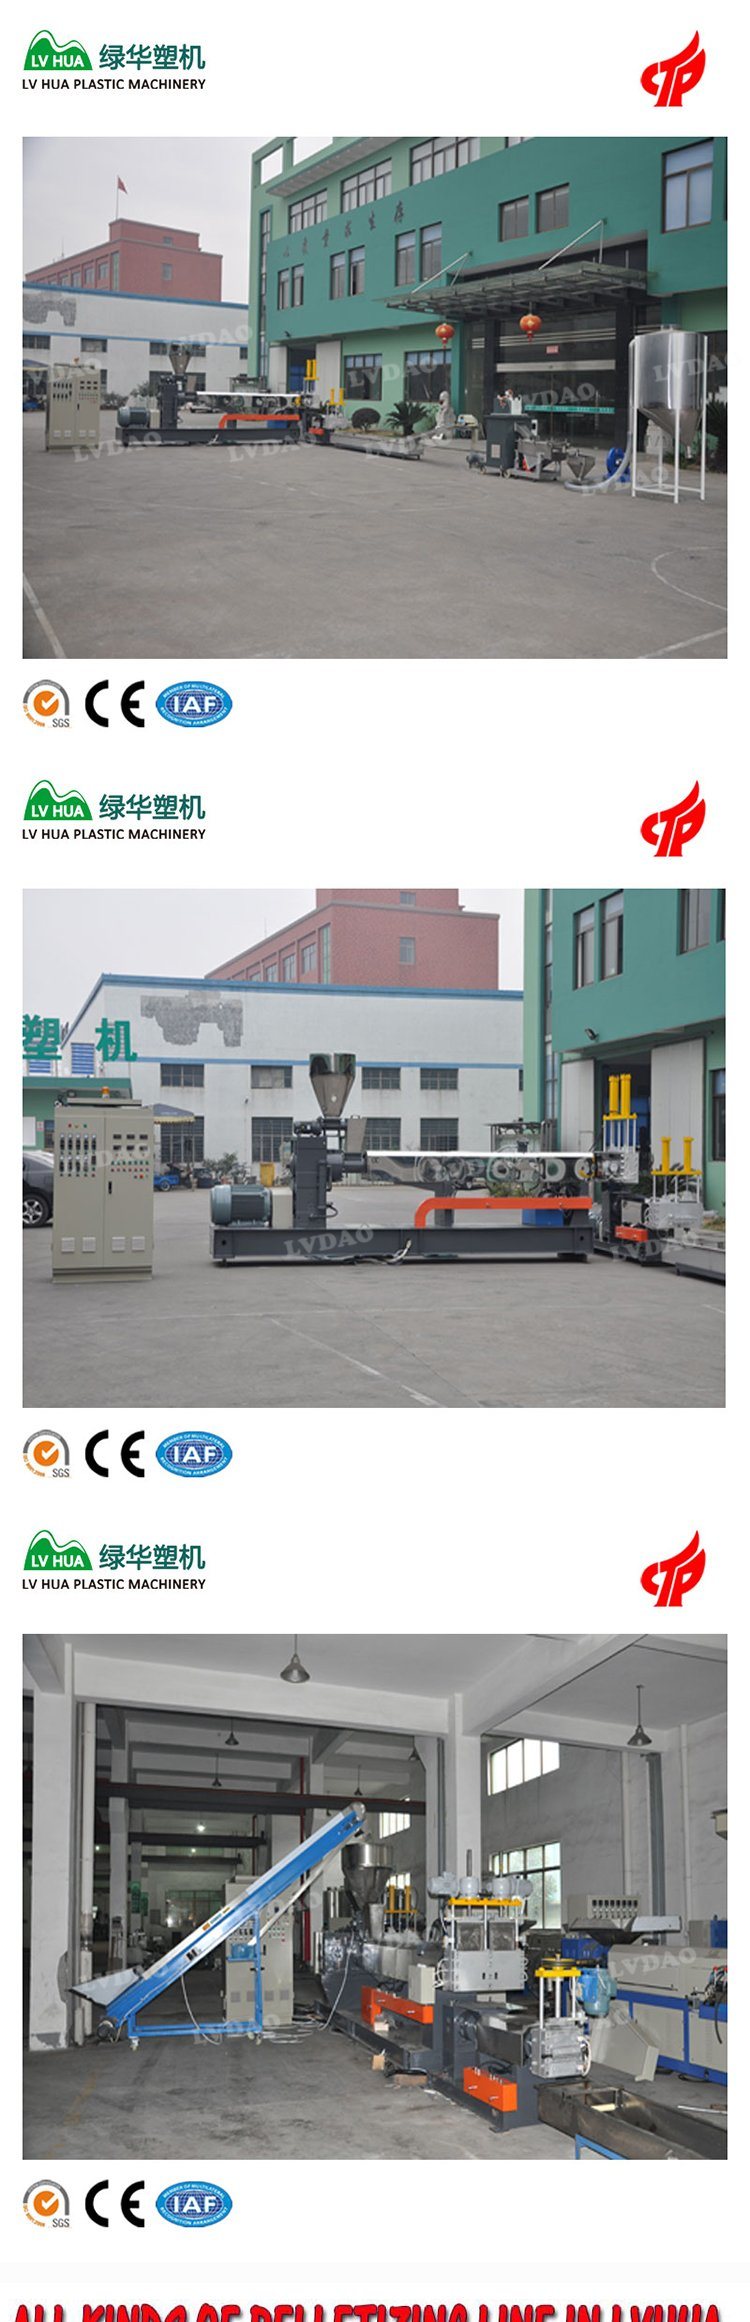 Hard Scrap Double Stage Plastic Recycling Machine